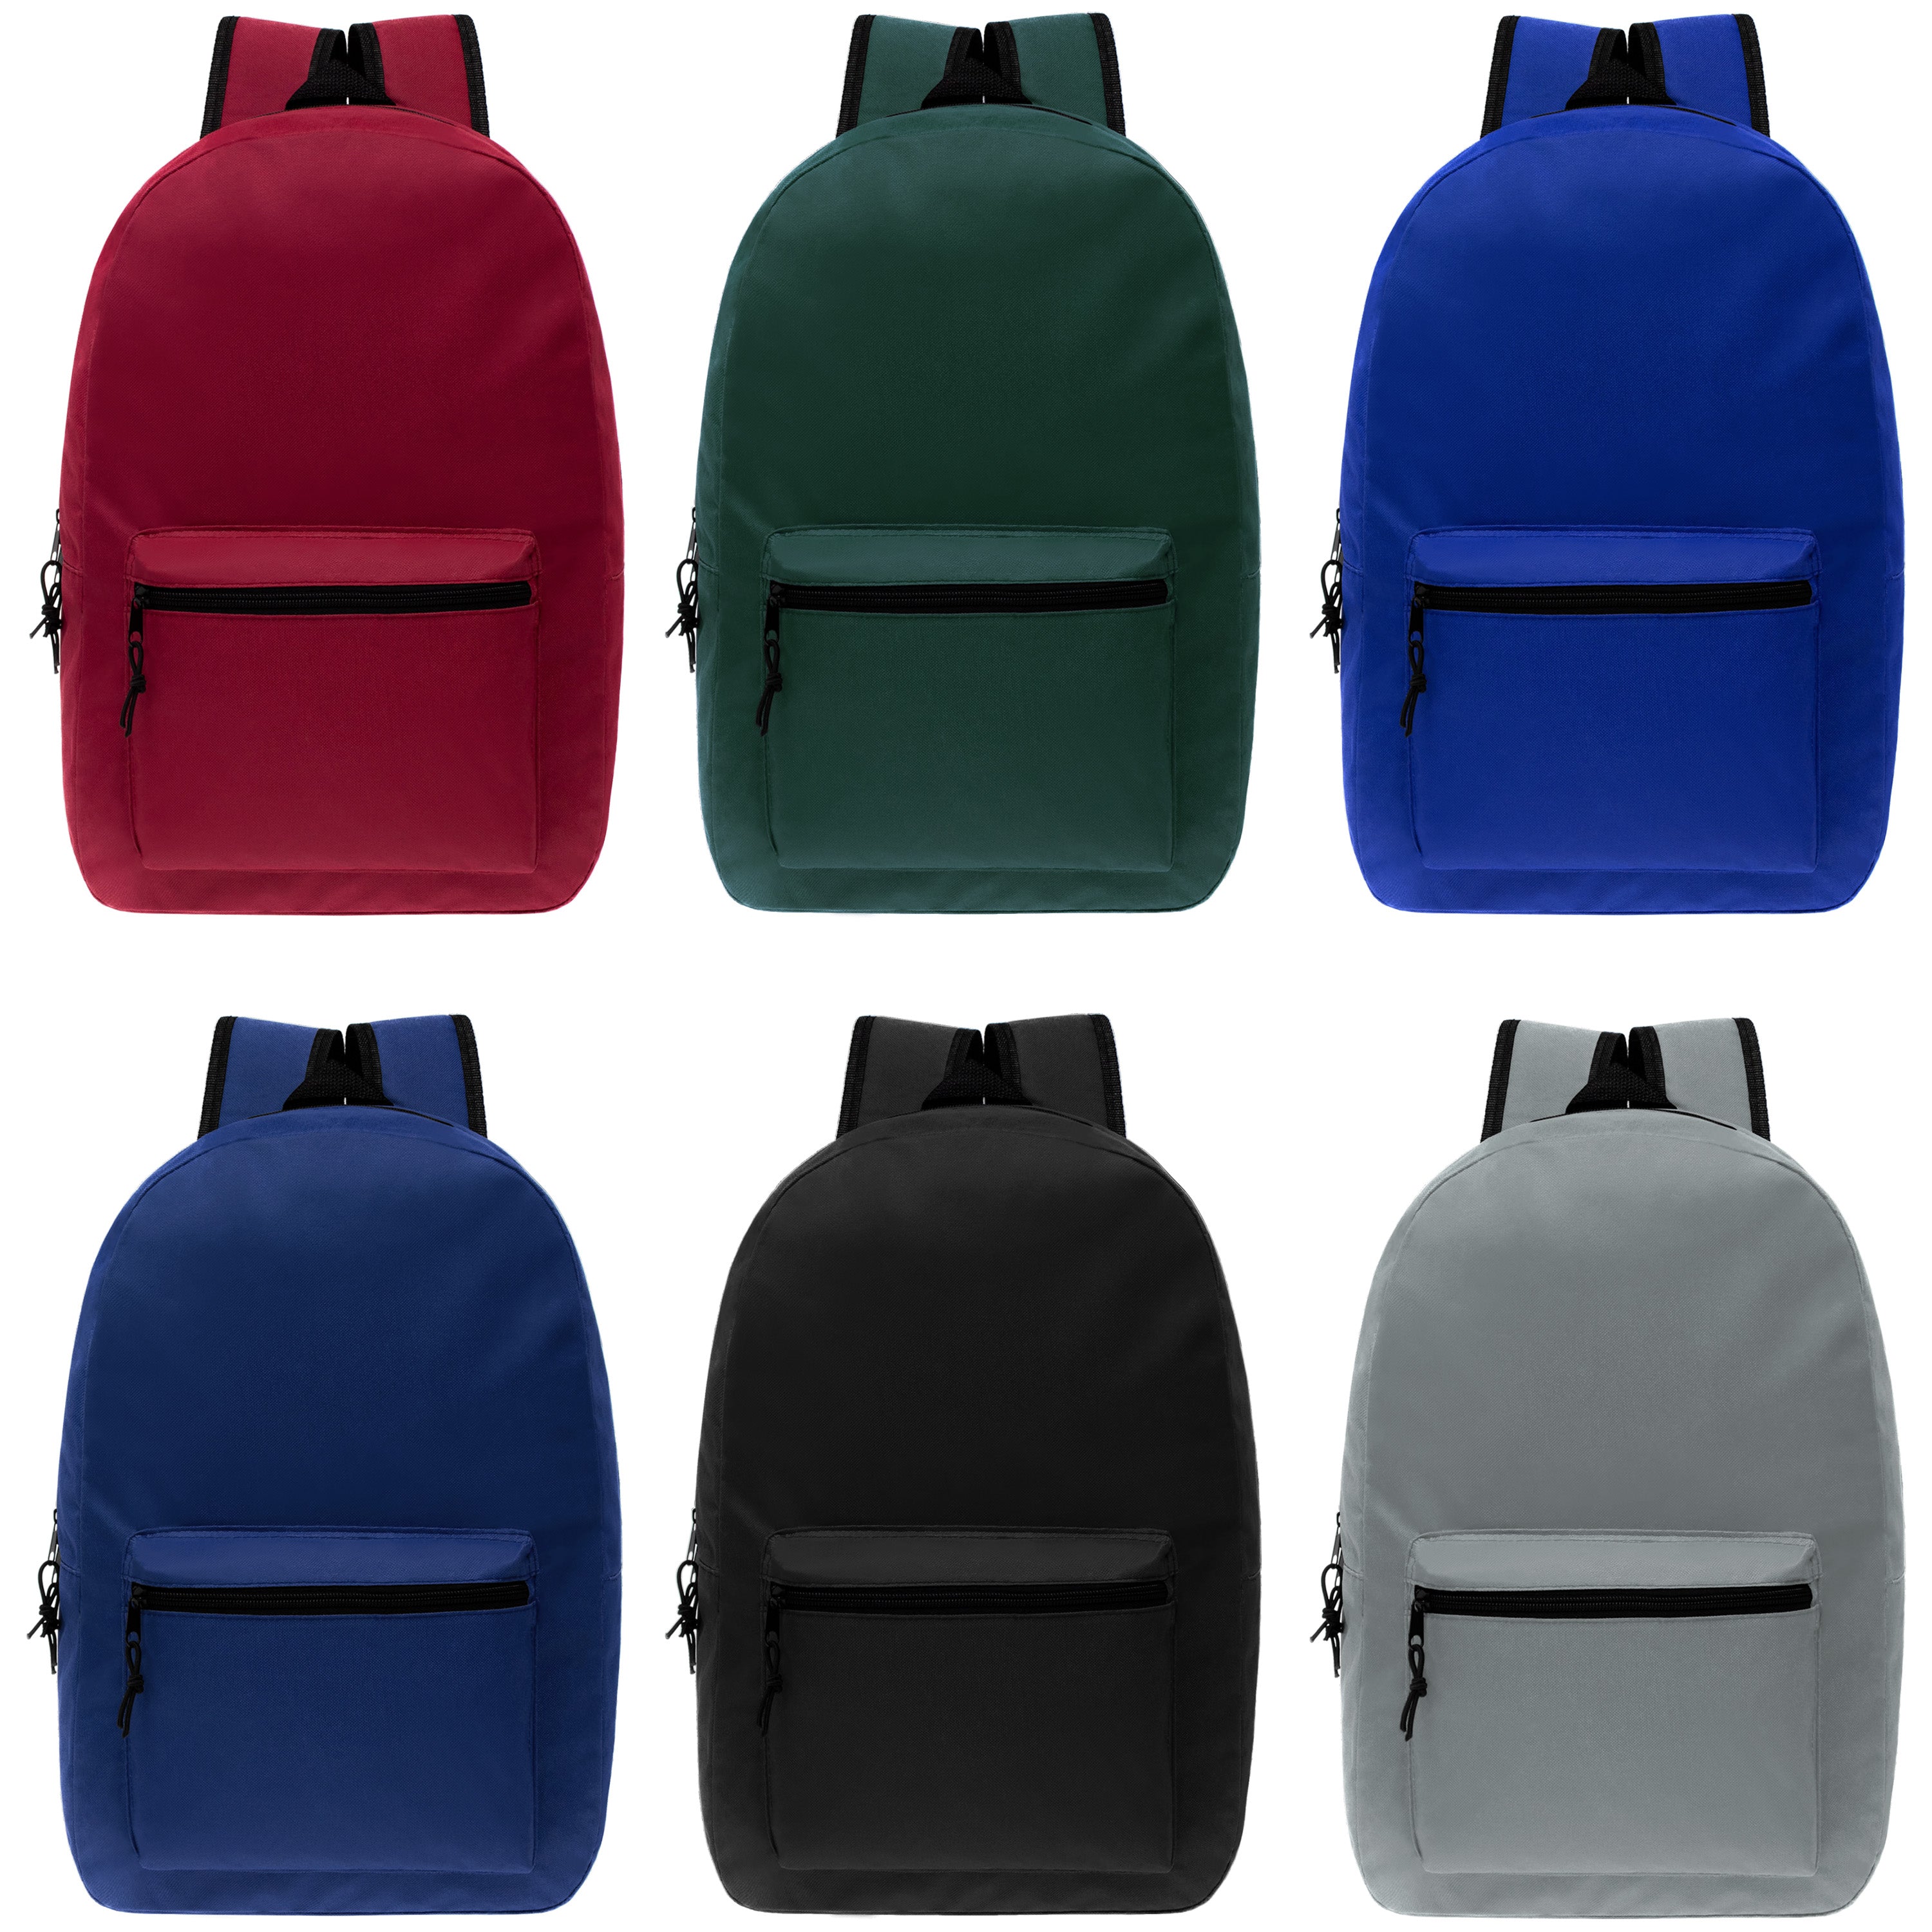 15 inches School Backpacks for Kids In Assorted Colors Wholesale School Supplies Kit Case Of 12